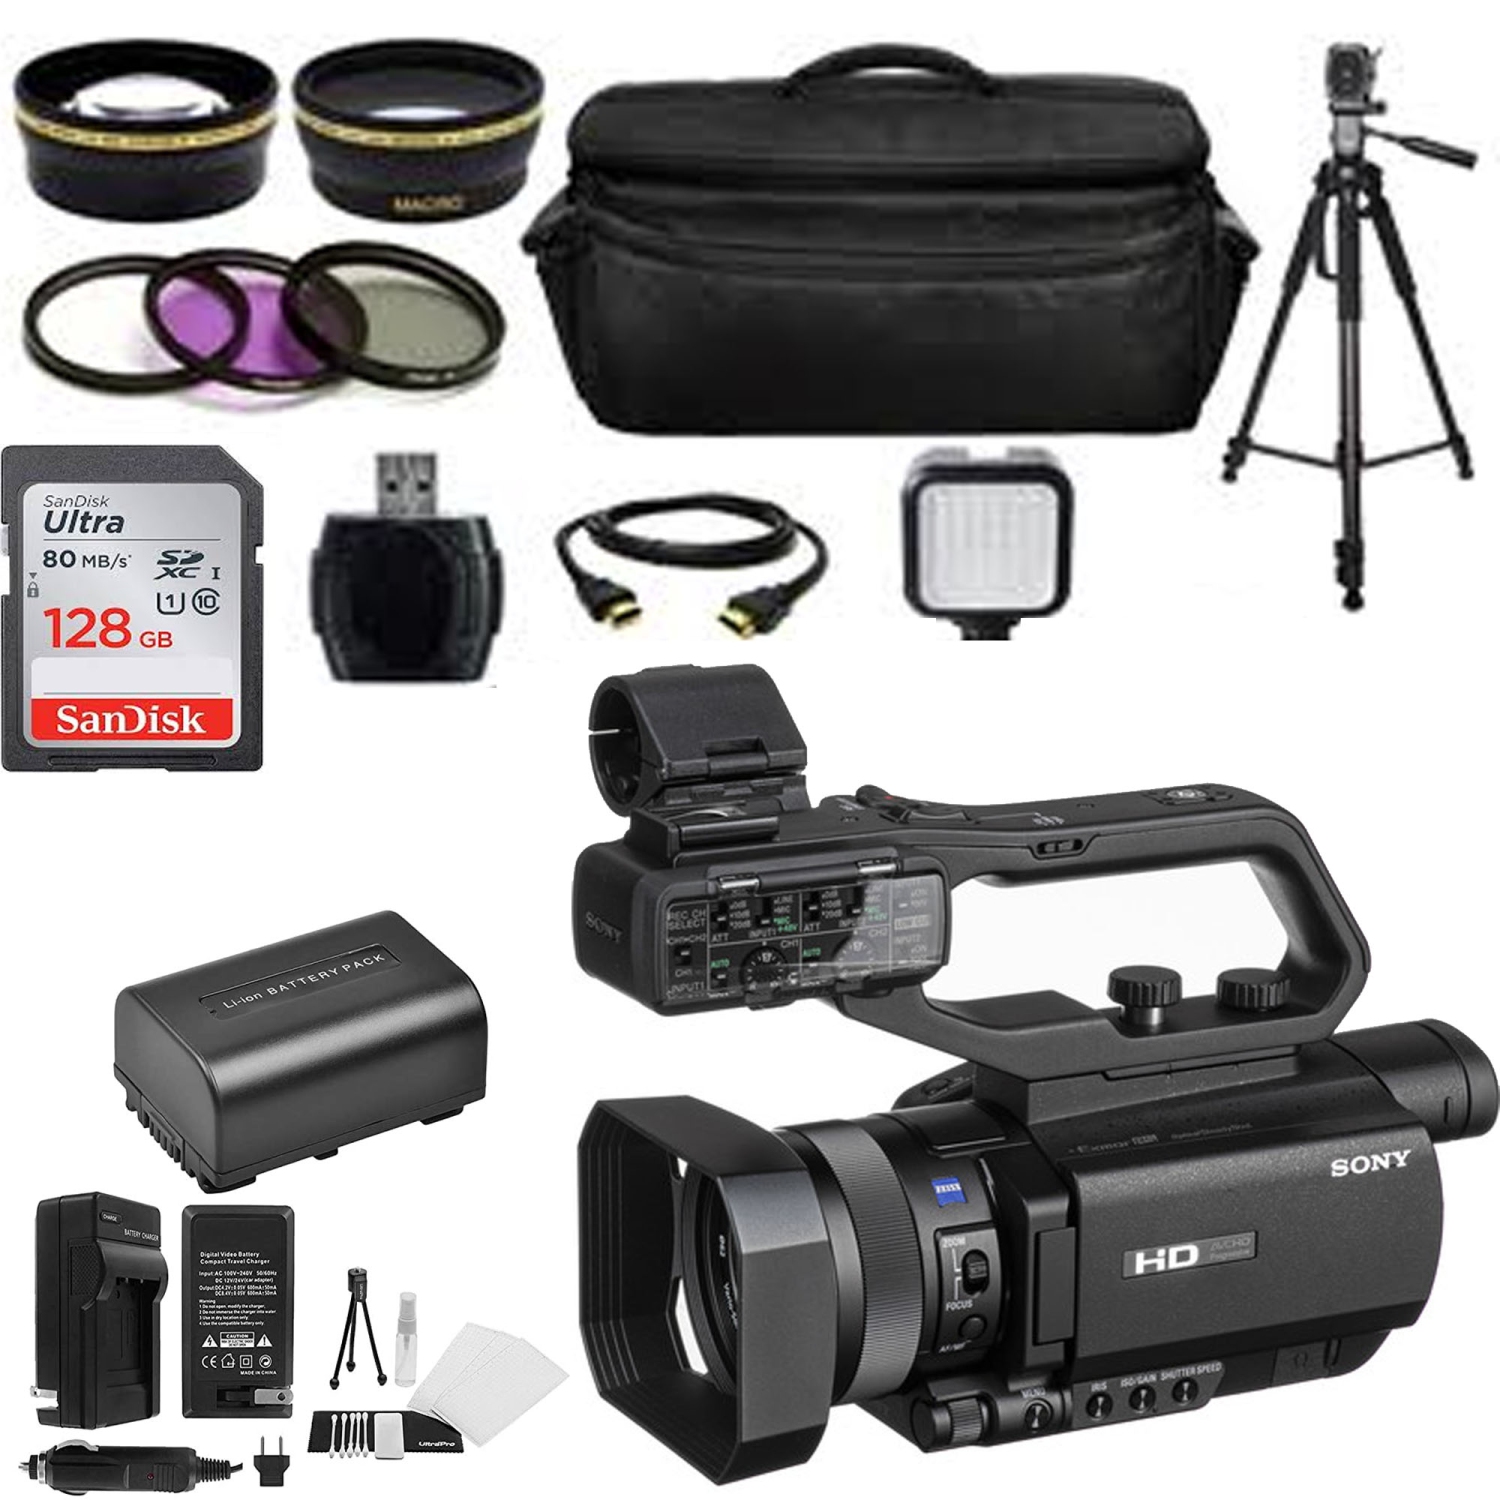 Sony HXR-MC88 Full HD Camcorder with Sandisk 128GB MC | Spare Battery & AC/DC Charger Essential Bundle - US Version w/ Seller Warranty